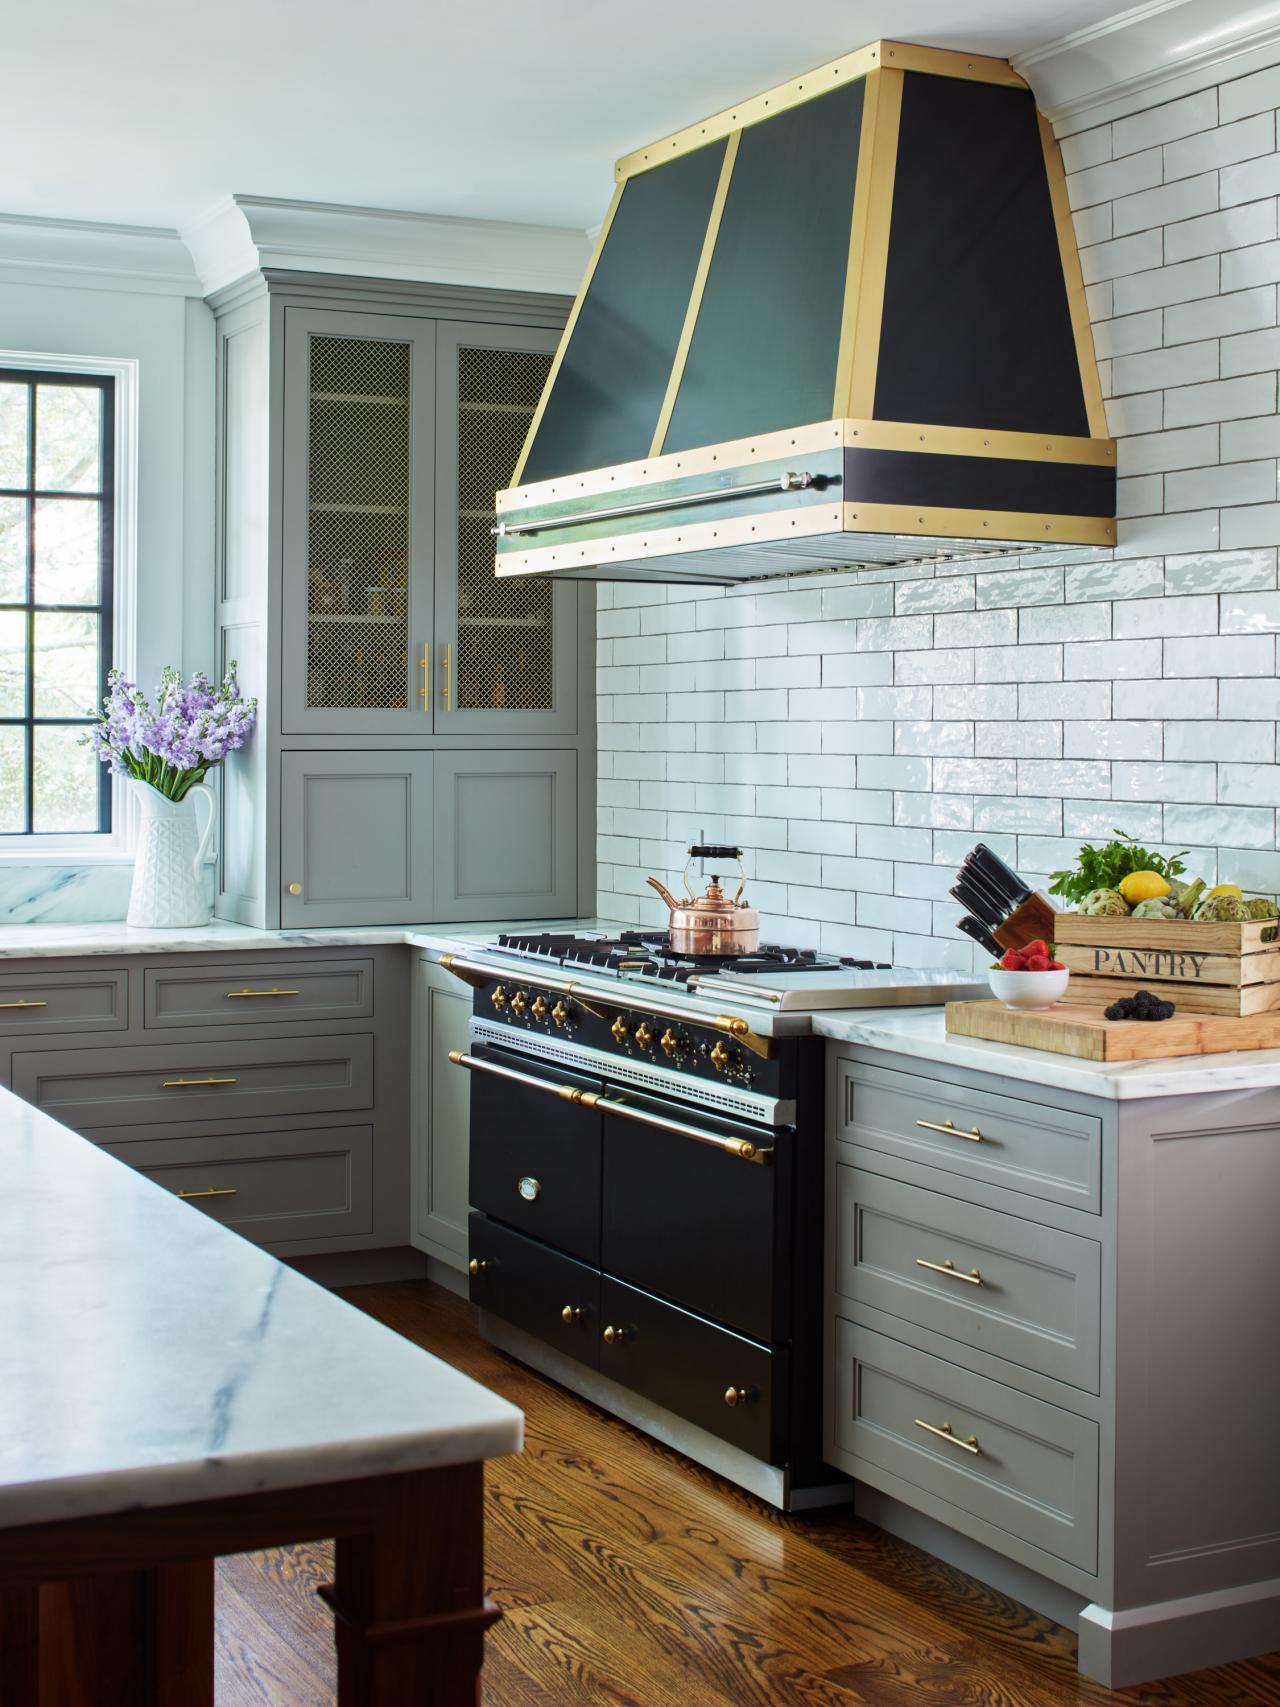 Subway Tile Backsplashes Pictures, Is Subway Tile Out Of Style 2020